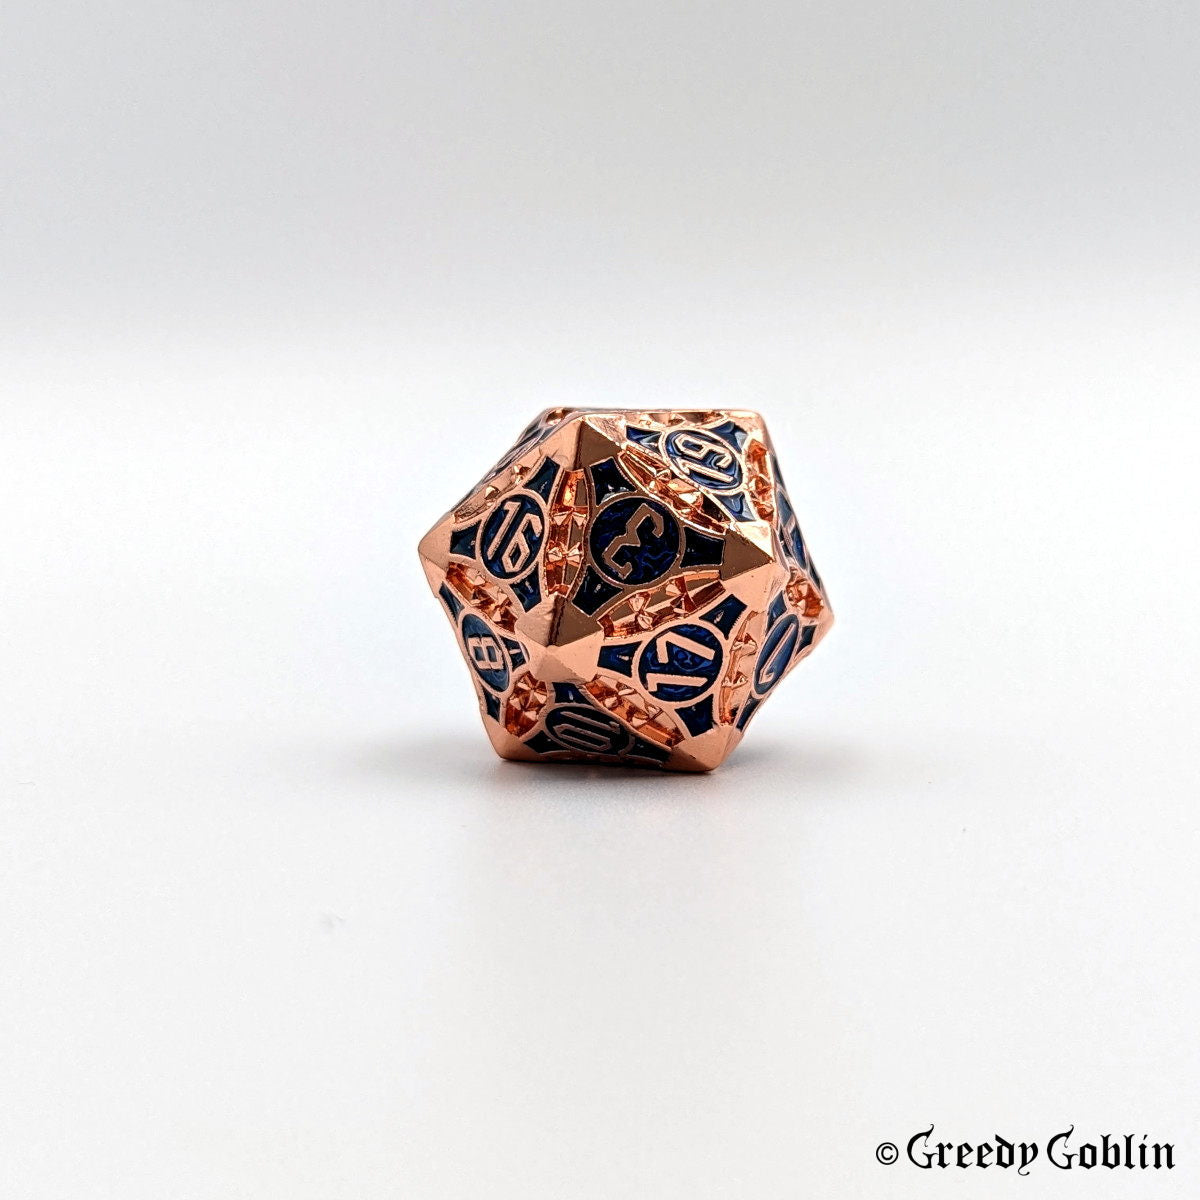 Copper metal D20 with blue engravings behind the numbers from Polydice set.